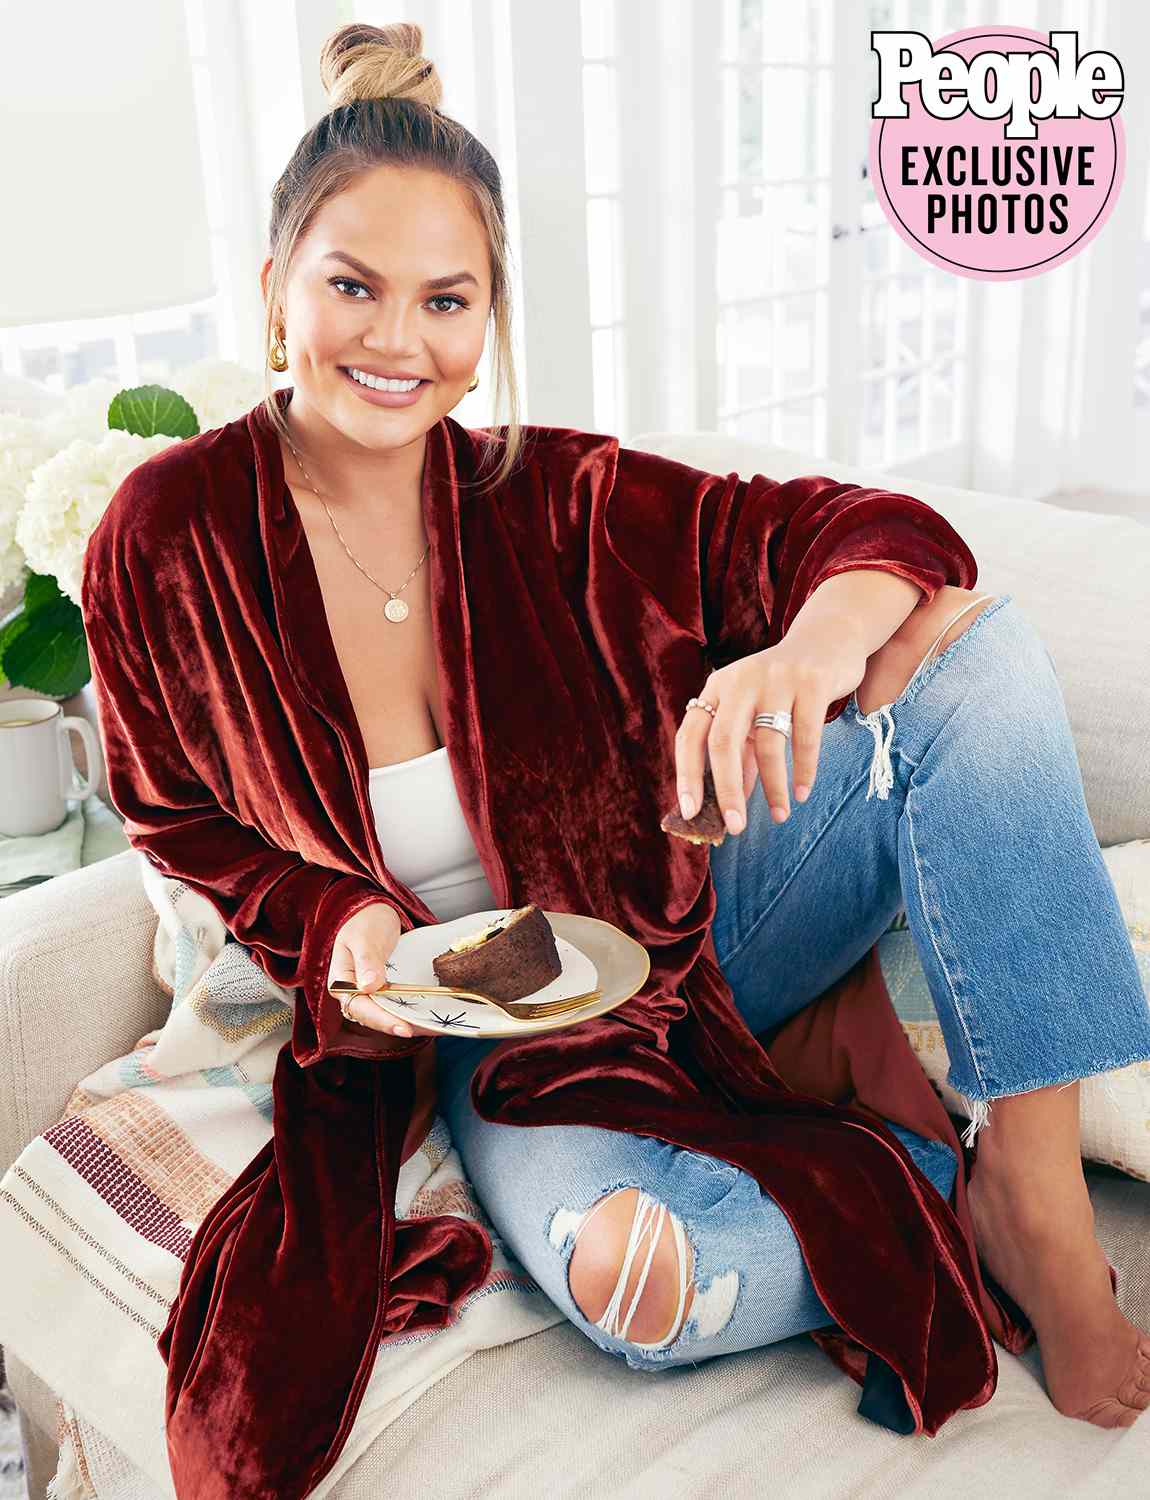 Chrissy Teigen photographed at a location house in Beverly Hills, CA, on August, 31, 2018.